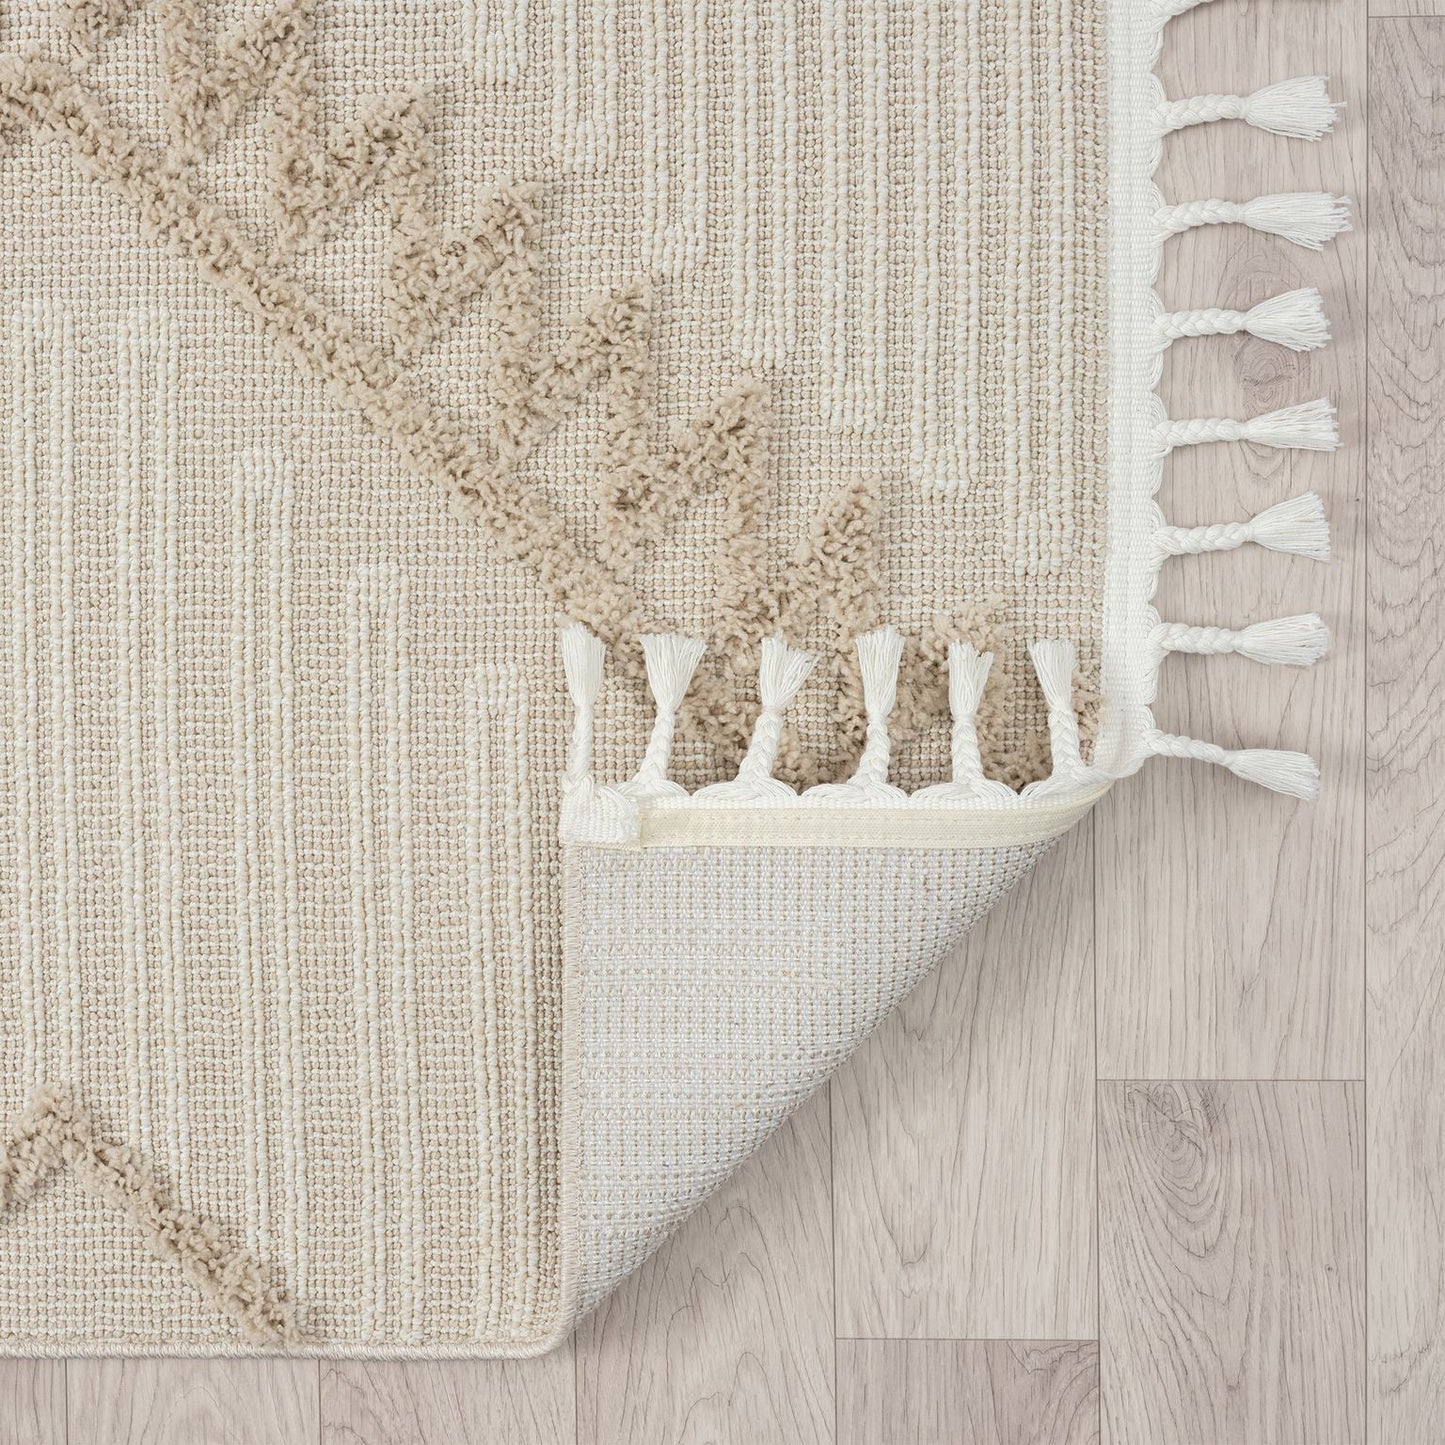 Cottage 545 Taupe Runner